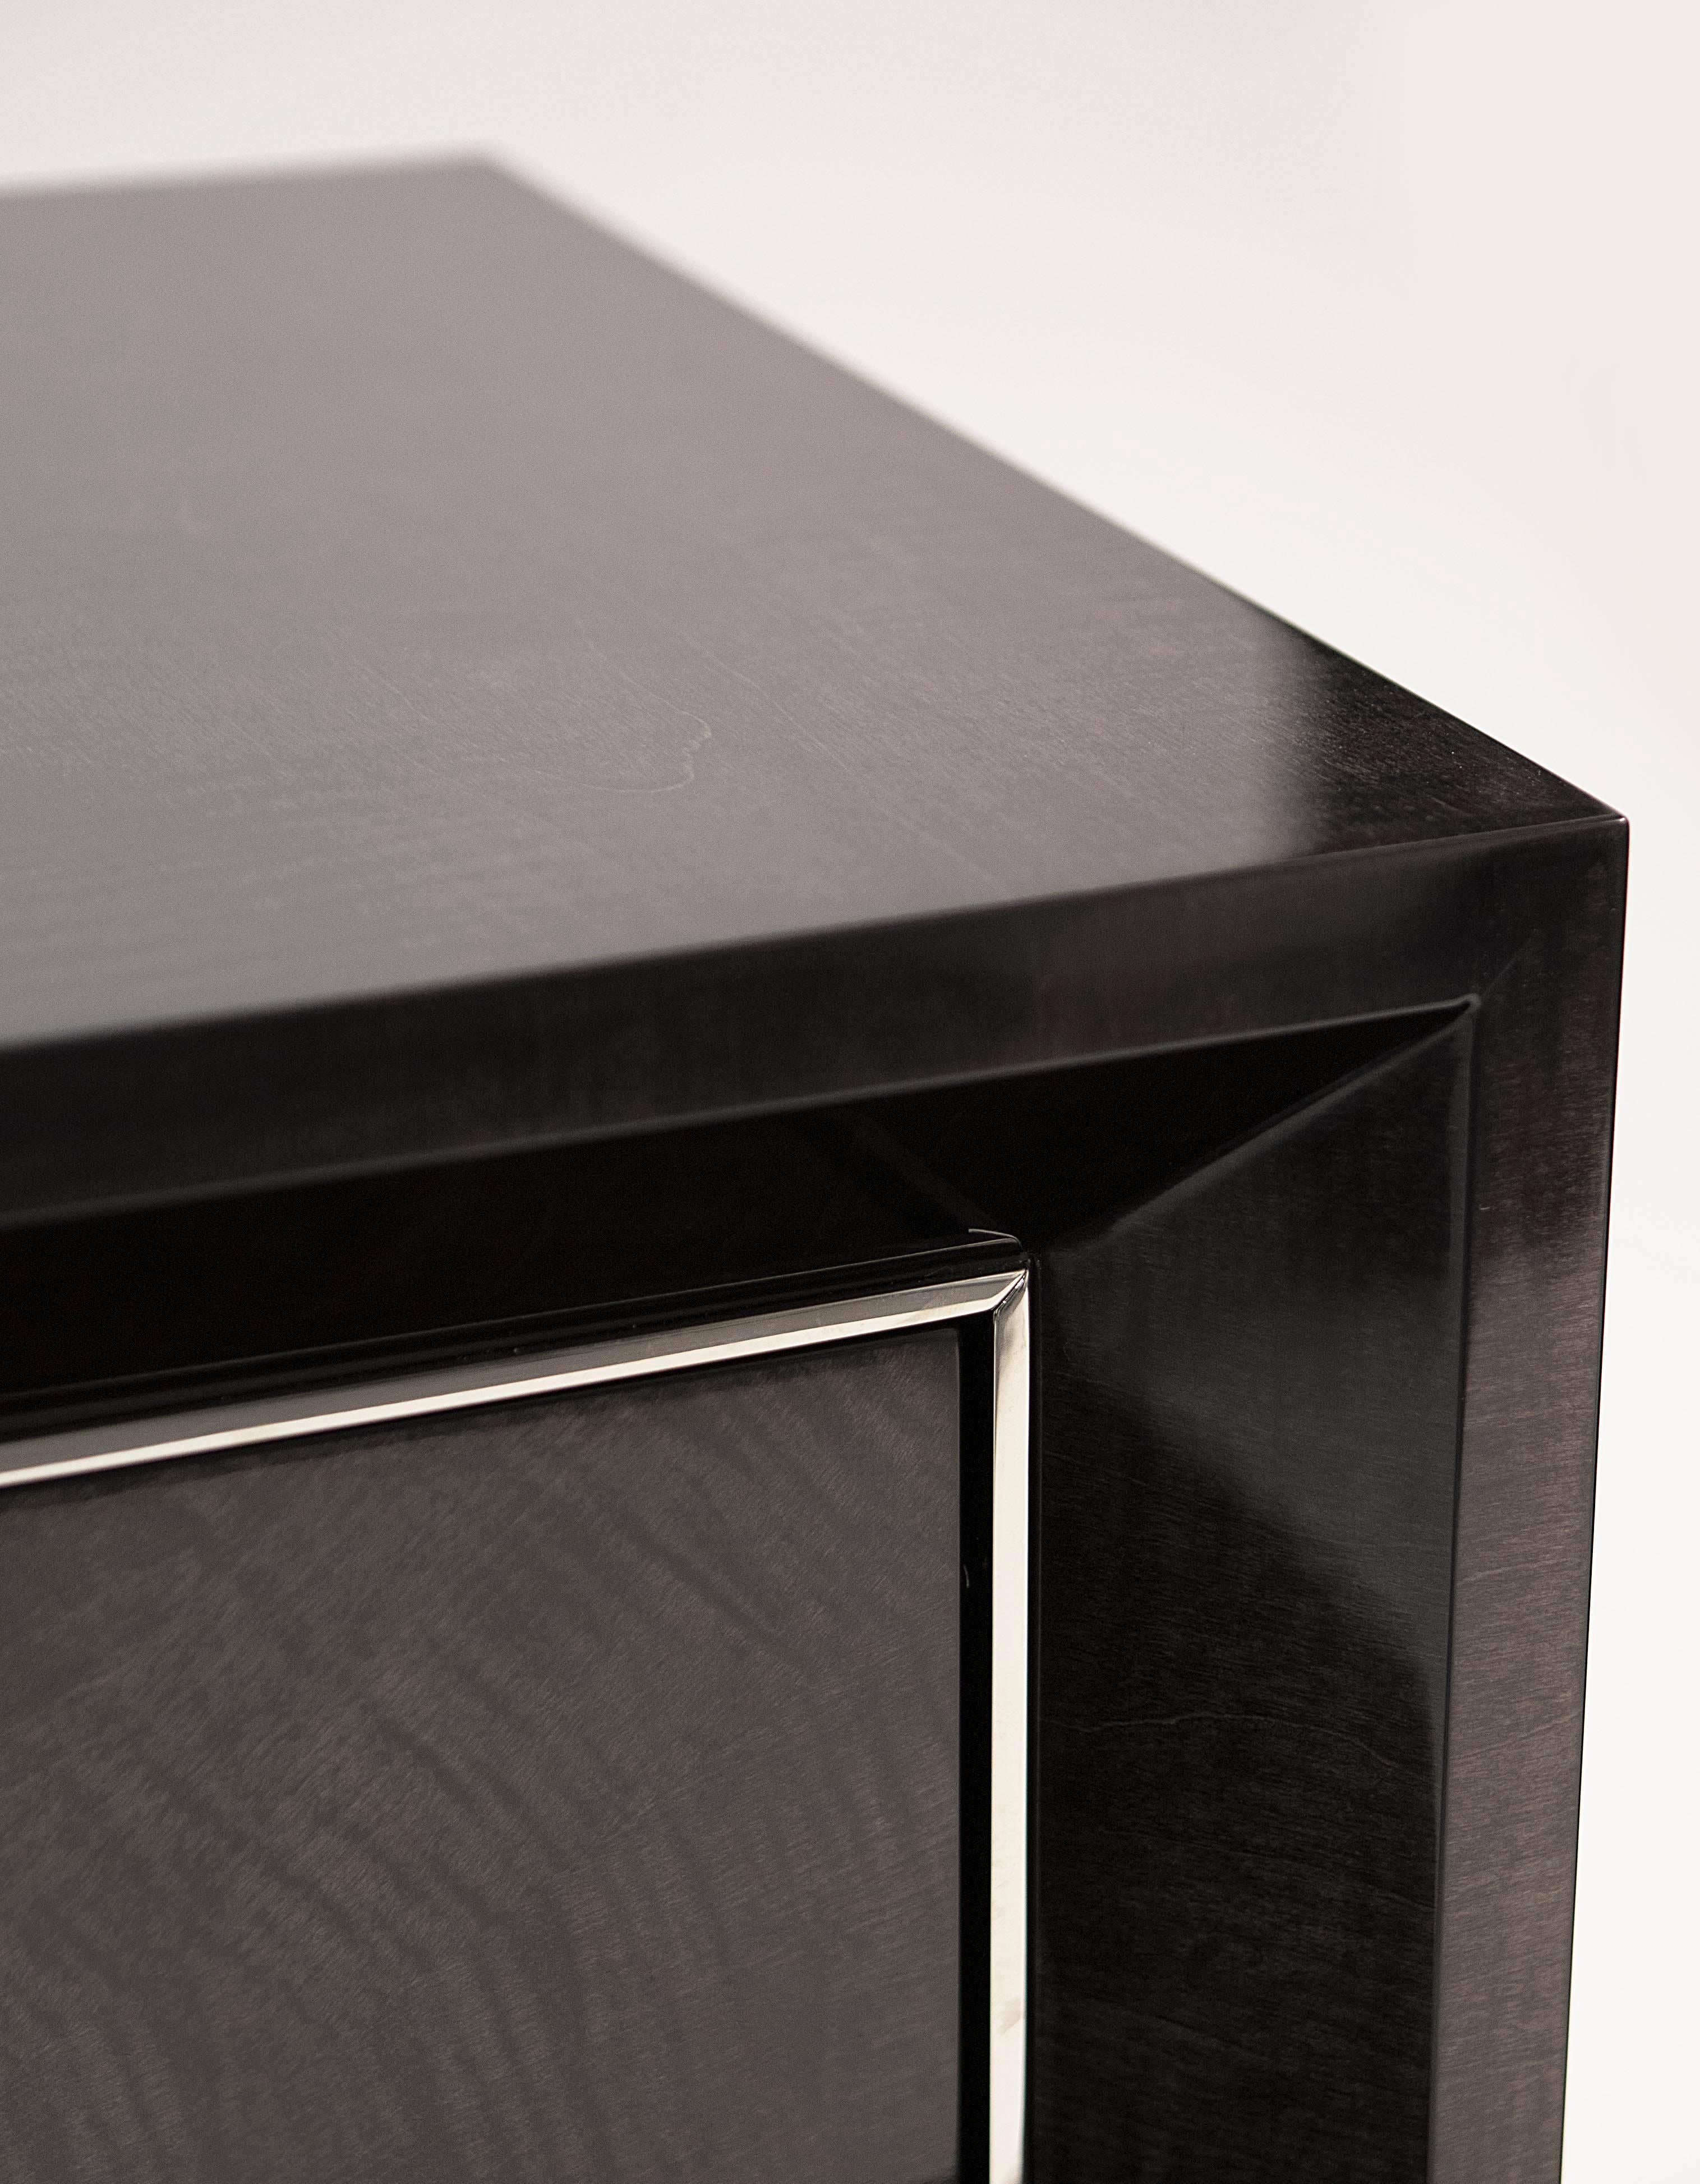 A smart side cabinet finished in sycamore black and polished nickel.

Smart and refined storage with a luxurious polished nickel moulding opening to reveal an interior in matte sycamore grey with two adjustable shelves.

There is the option of a